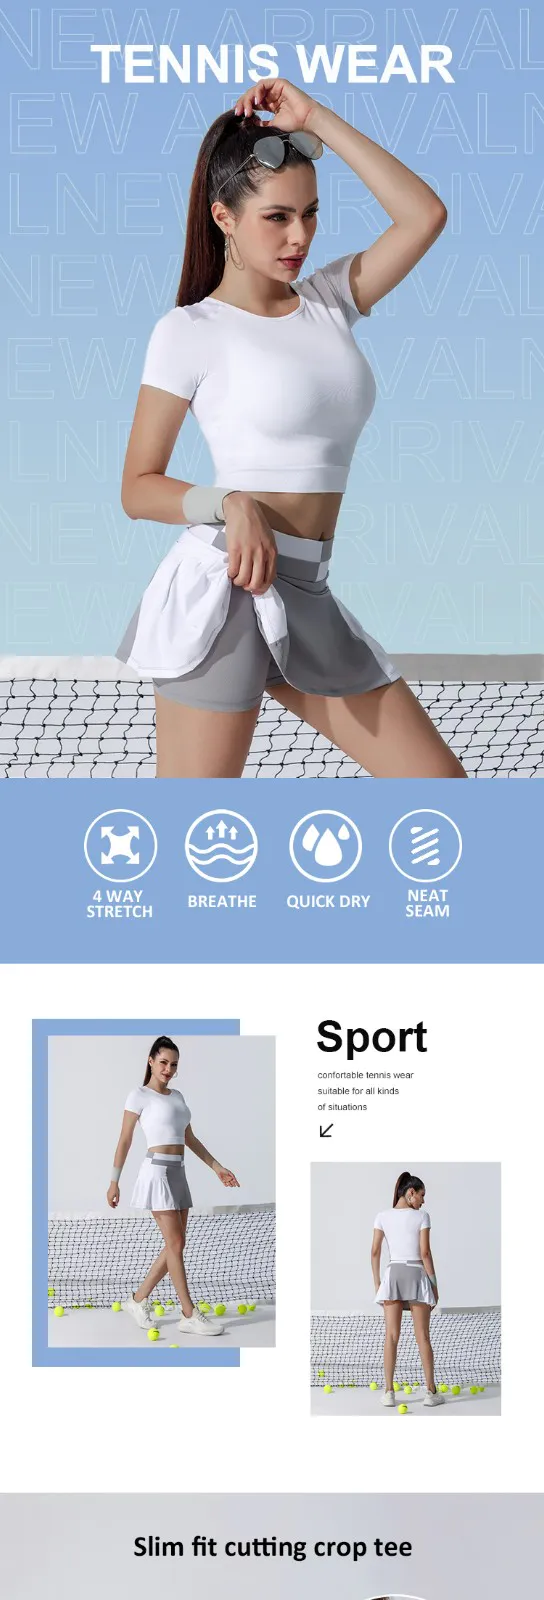 INGOR personalized tennis outfit woman type for yoga